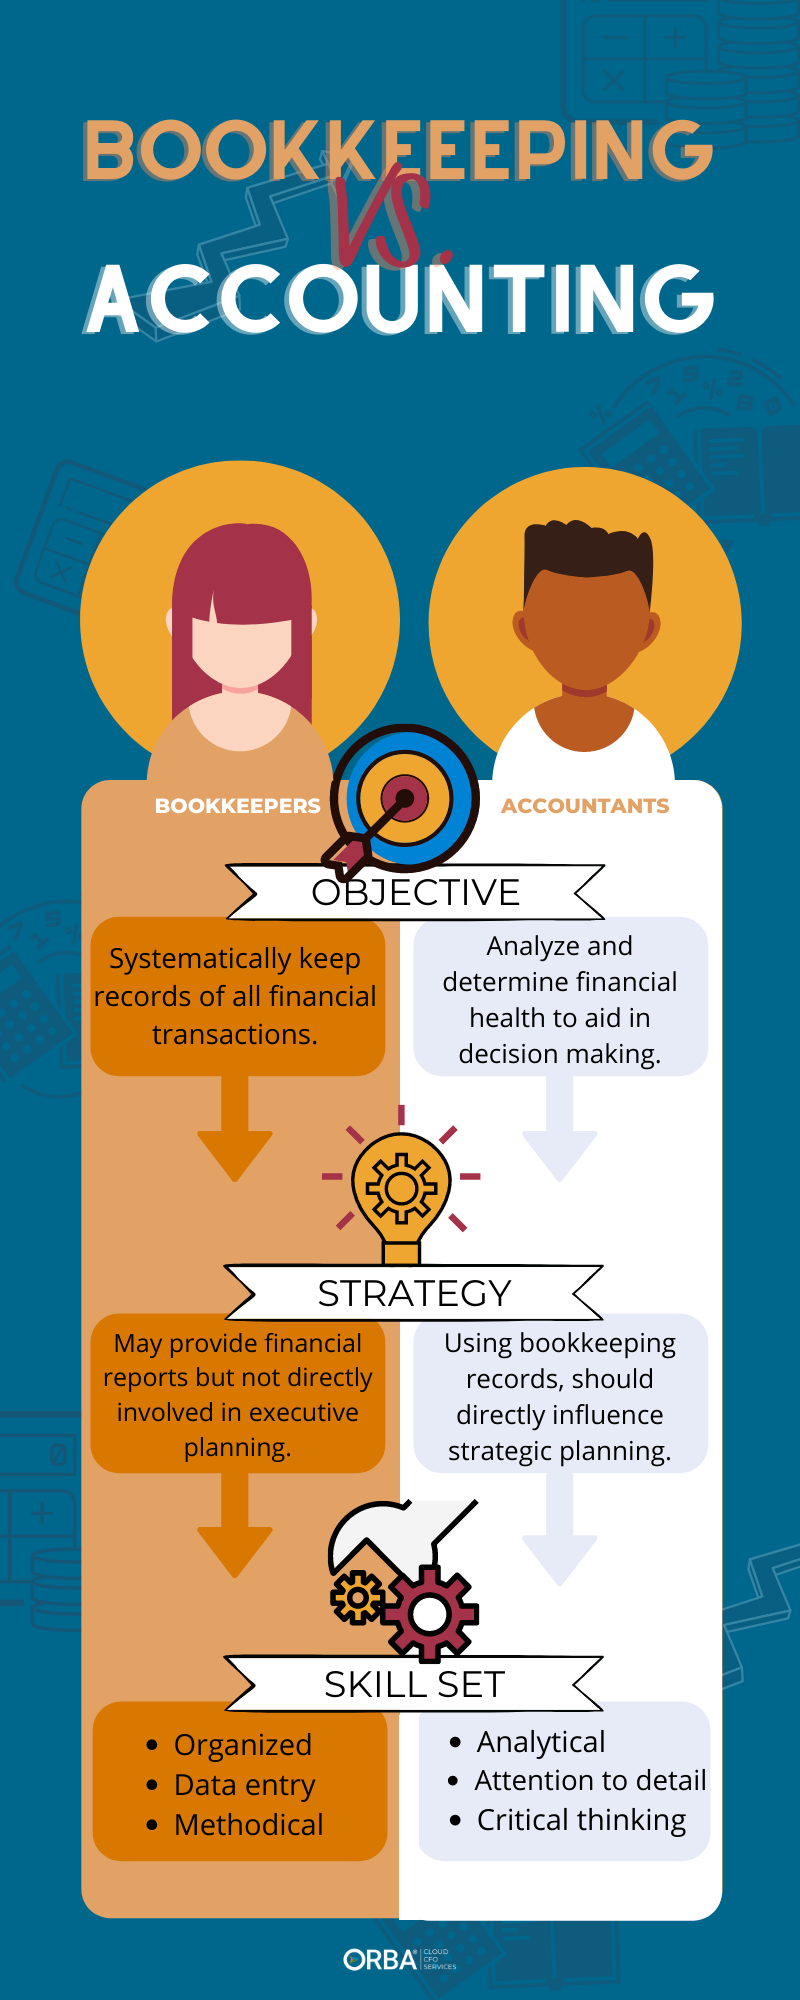 Infographic explaining the difference between bookkeeping and accounting by objective (transactional vs analysis); strategy; and skill set. 